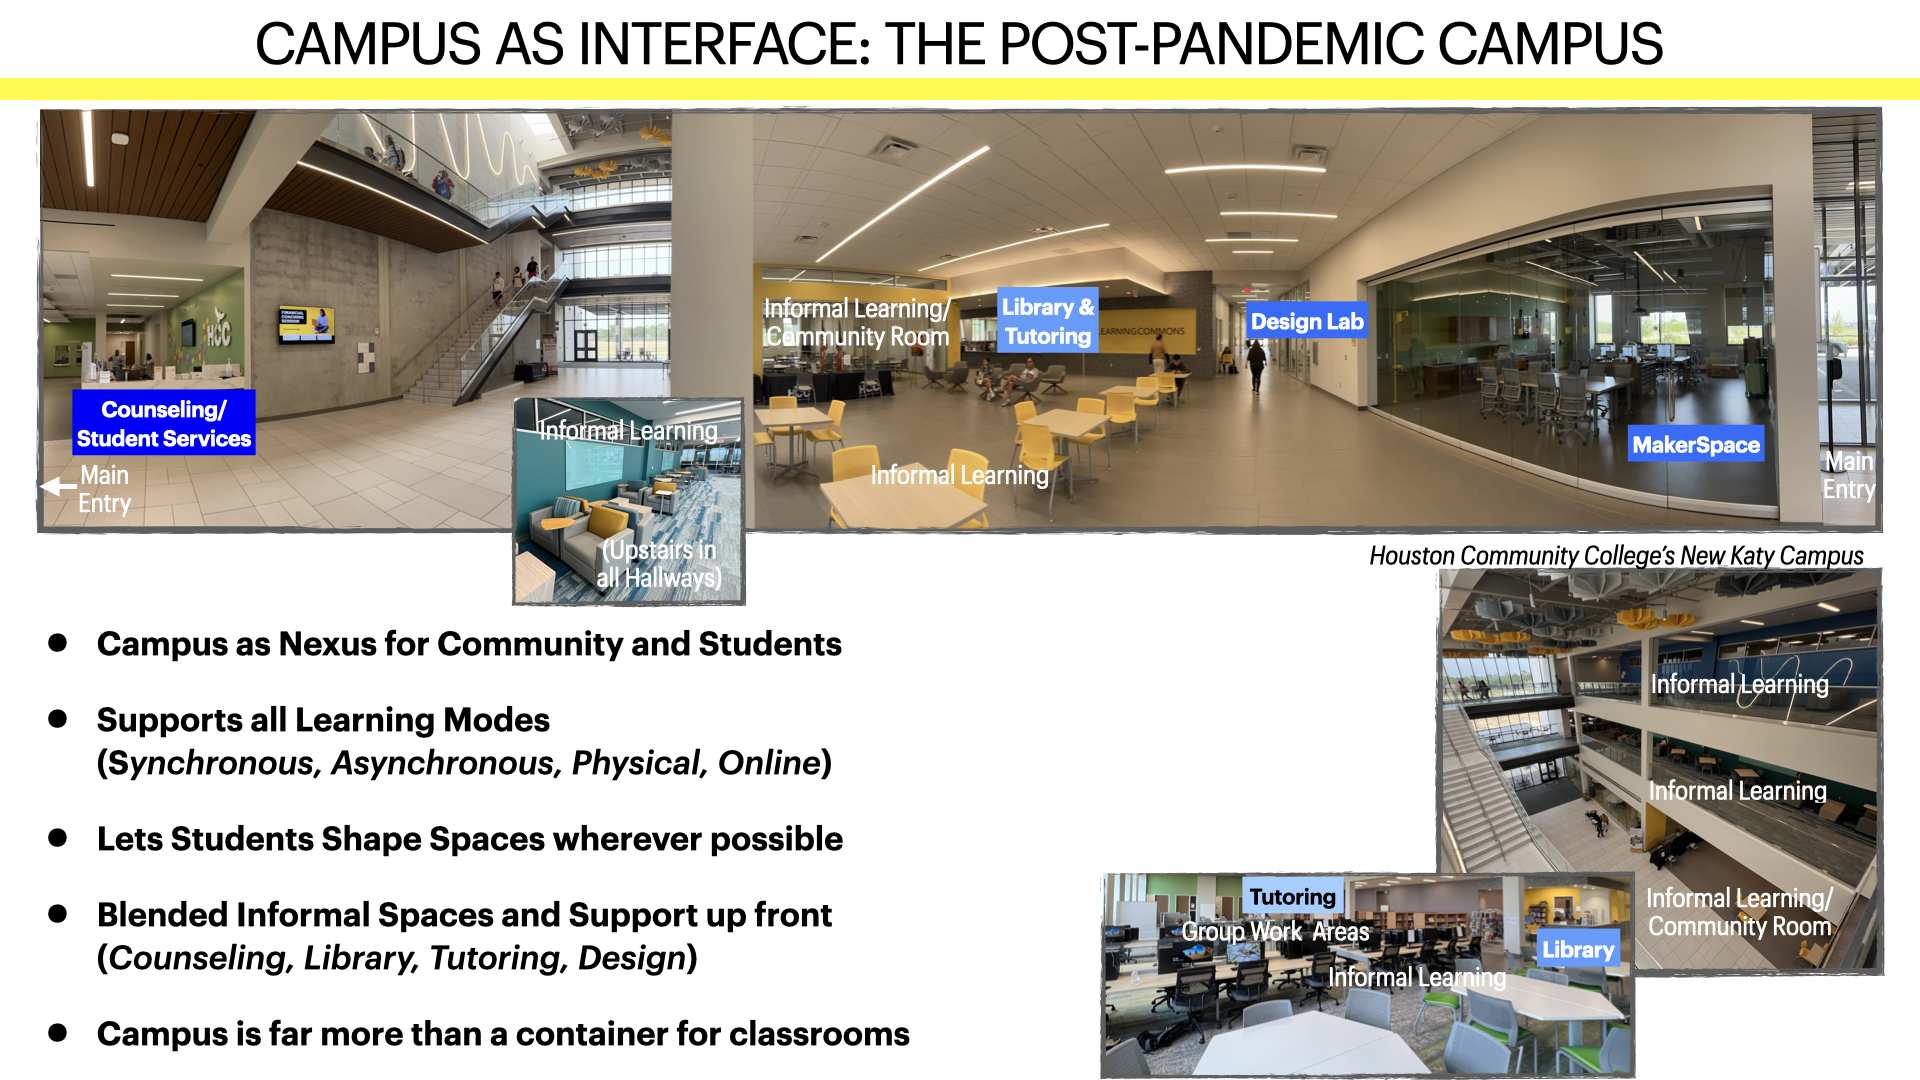 The Katy Campus as Post-Pandemic Model